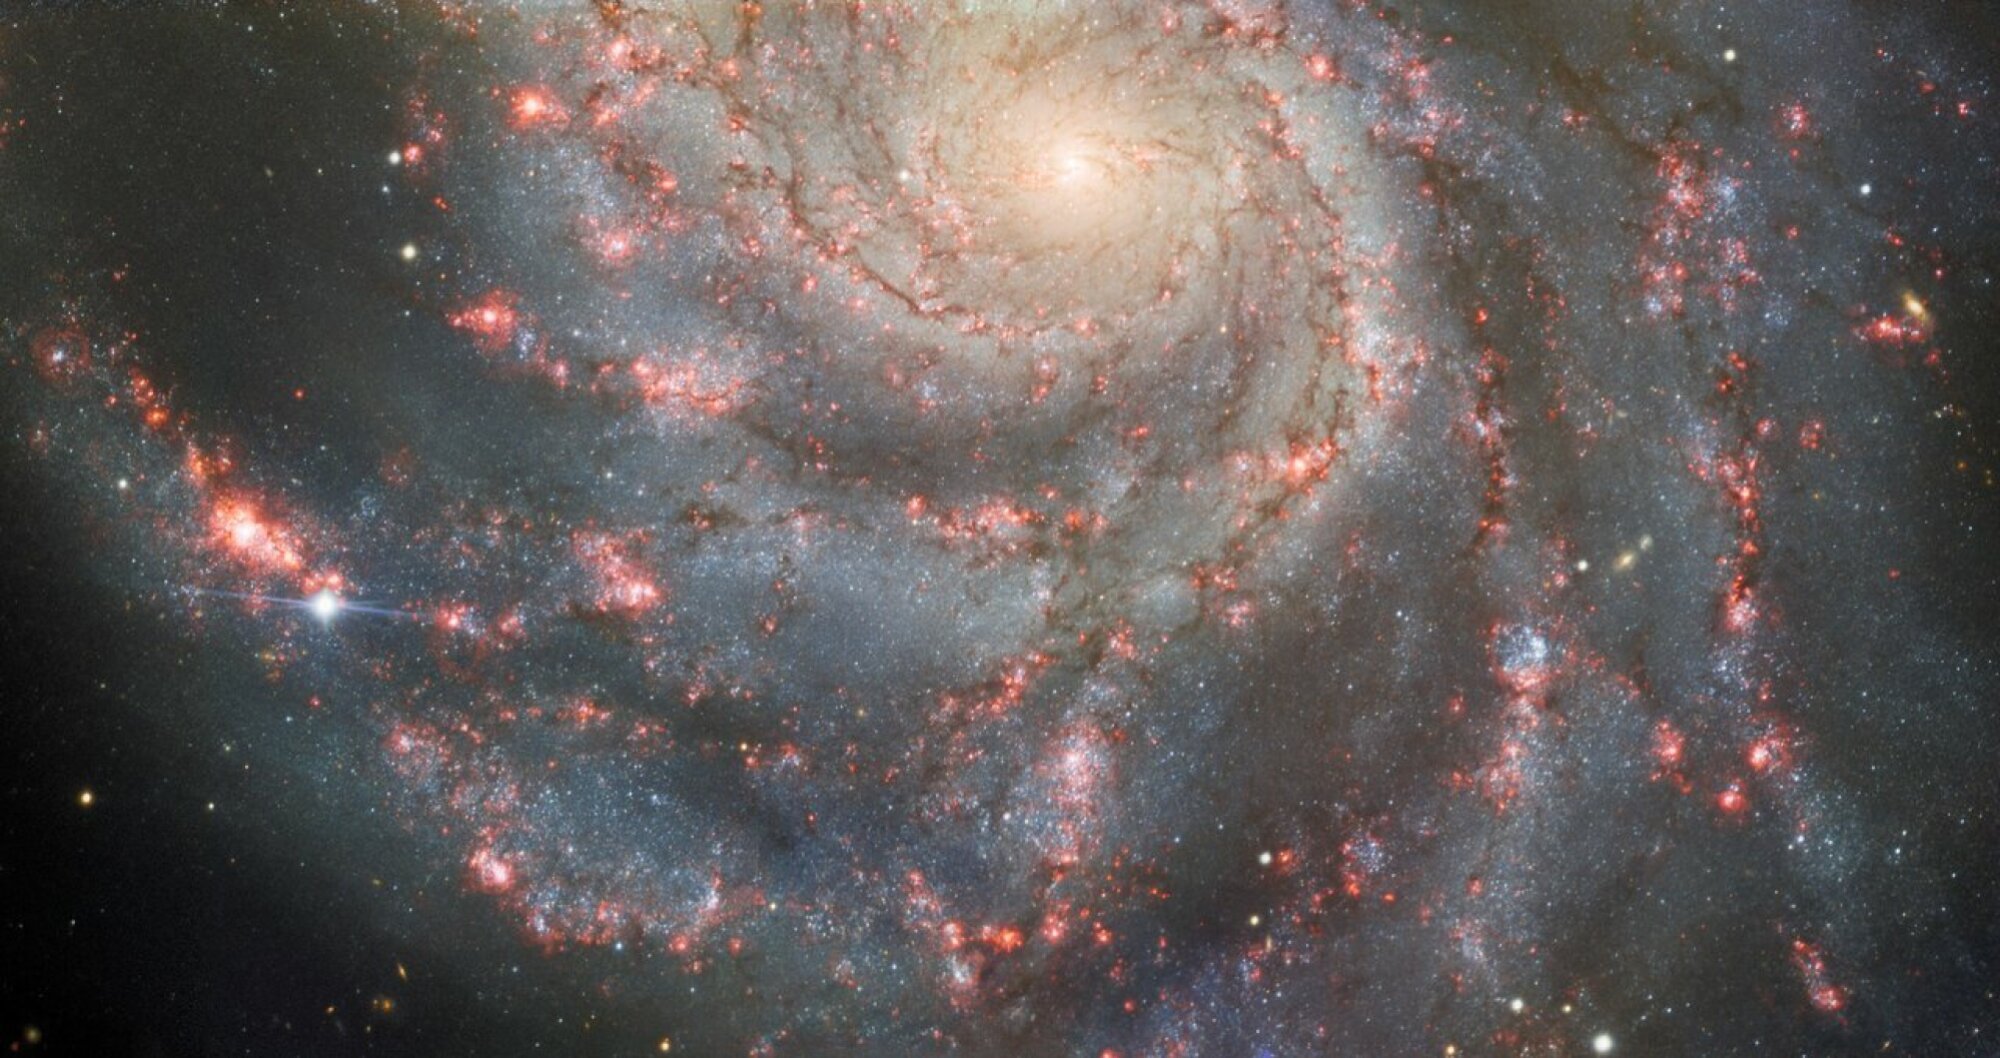 The supernova in the Pinwheel galaxy, located on the far left center in the image.